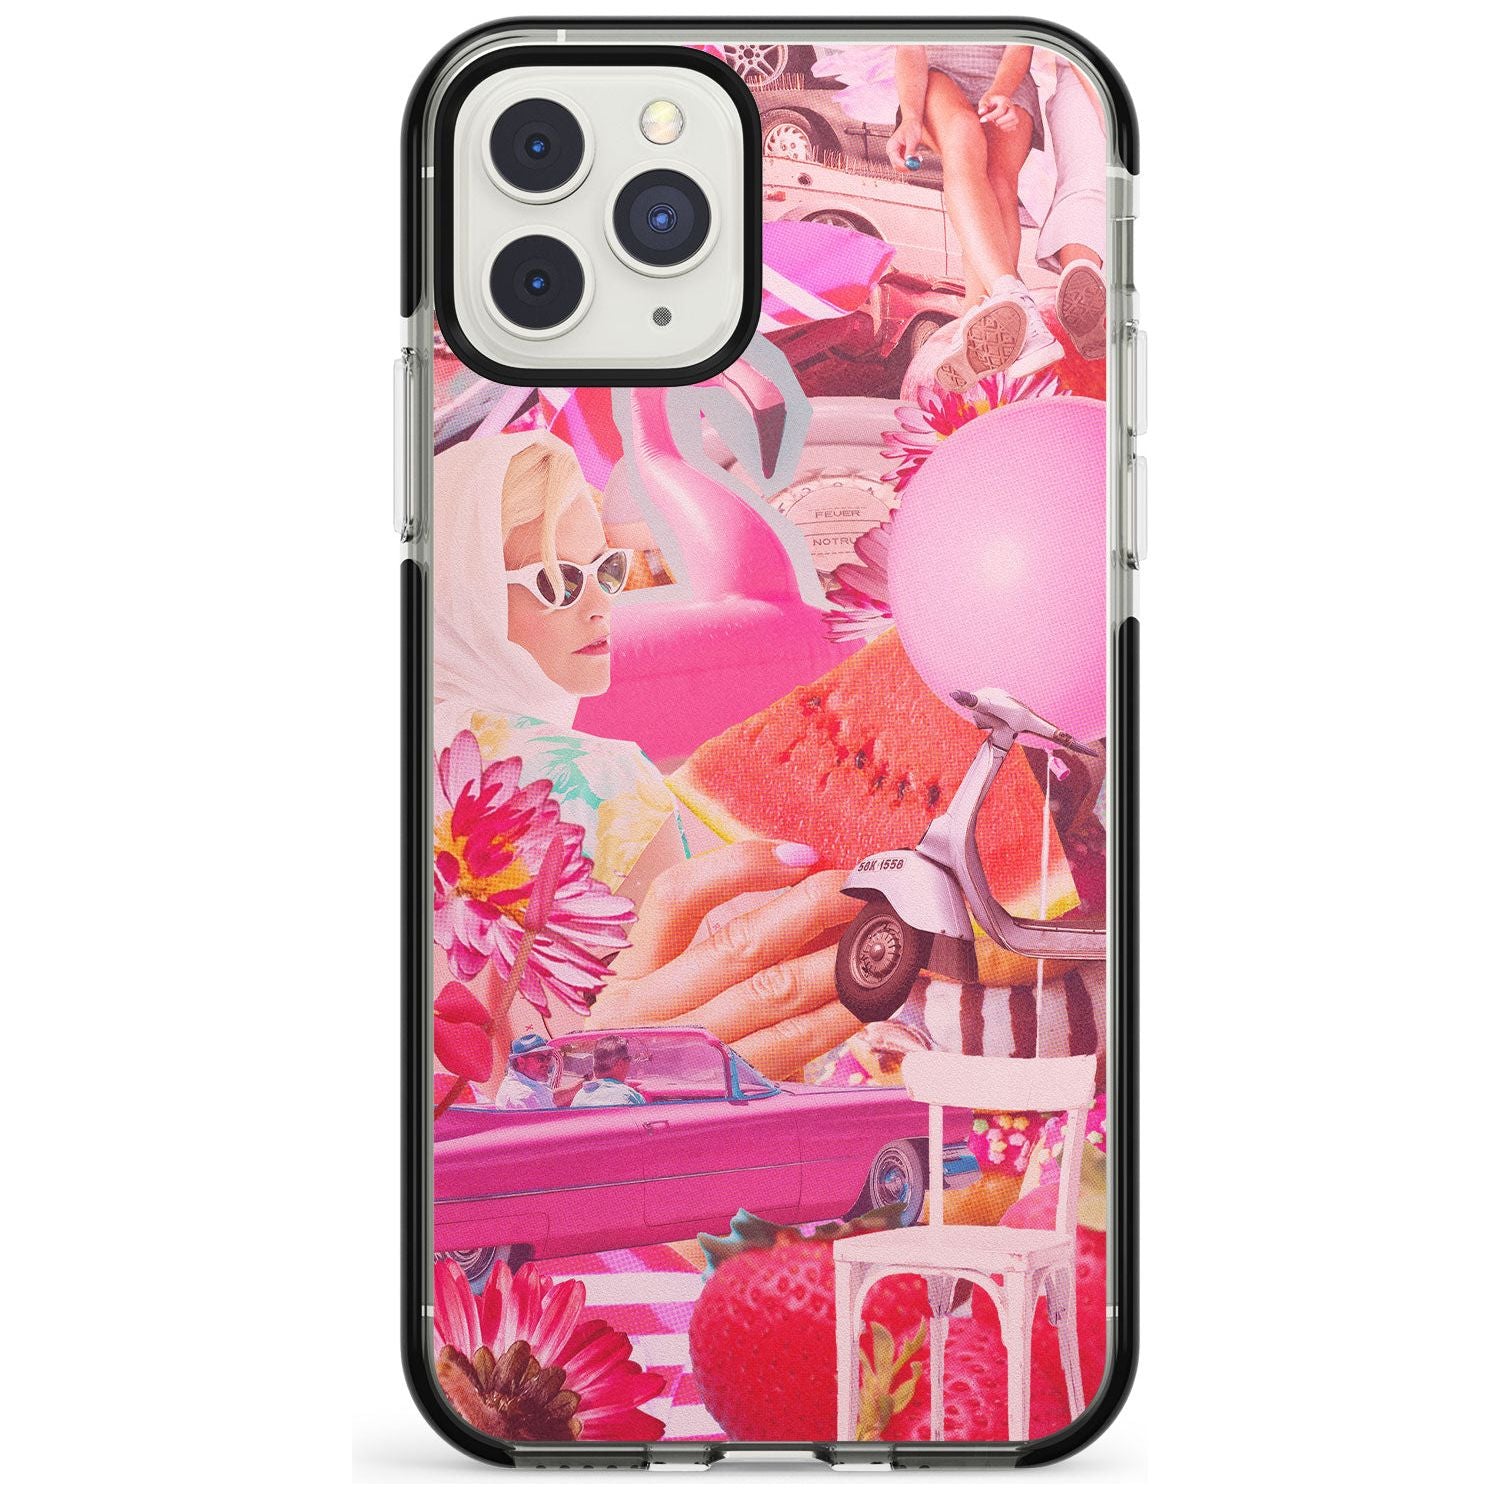 Vintage Collage: Pink Glamour Black Impact Phone Case for iPhone 11 Pro Max